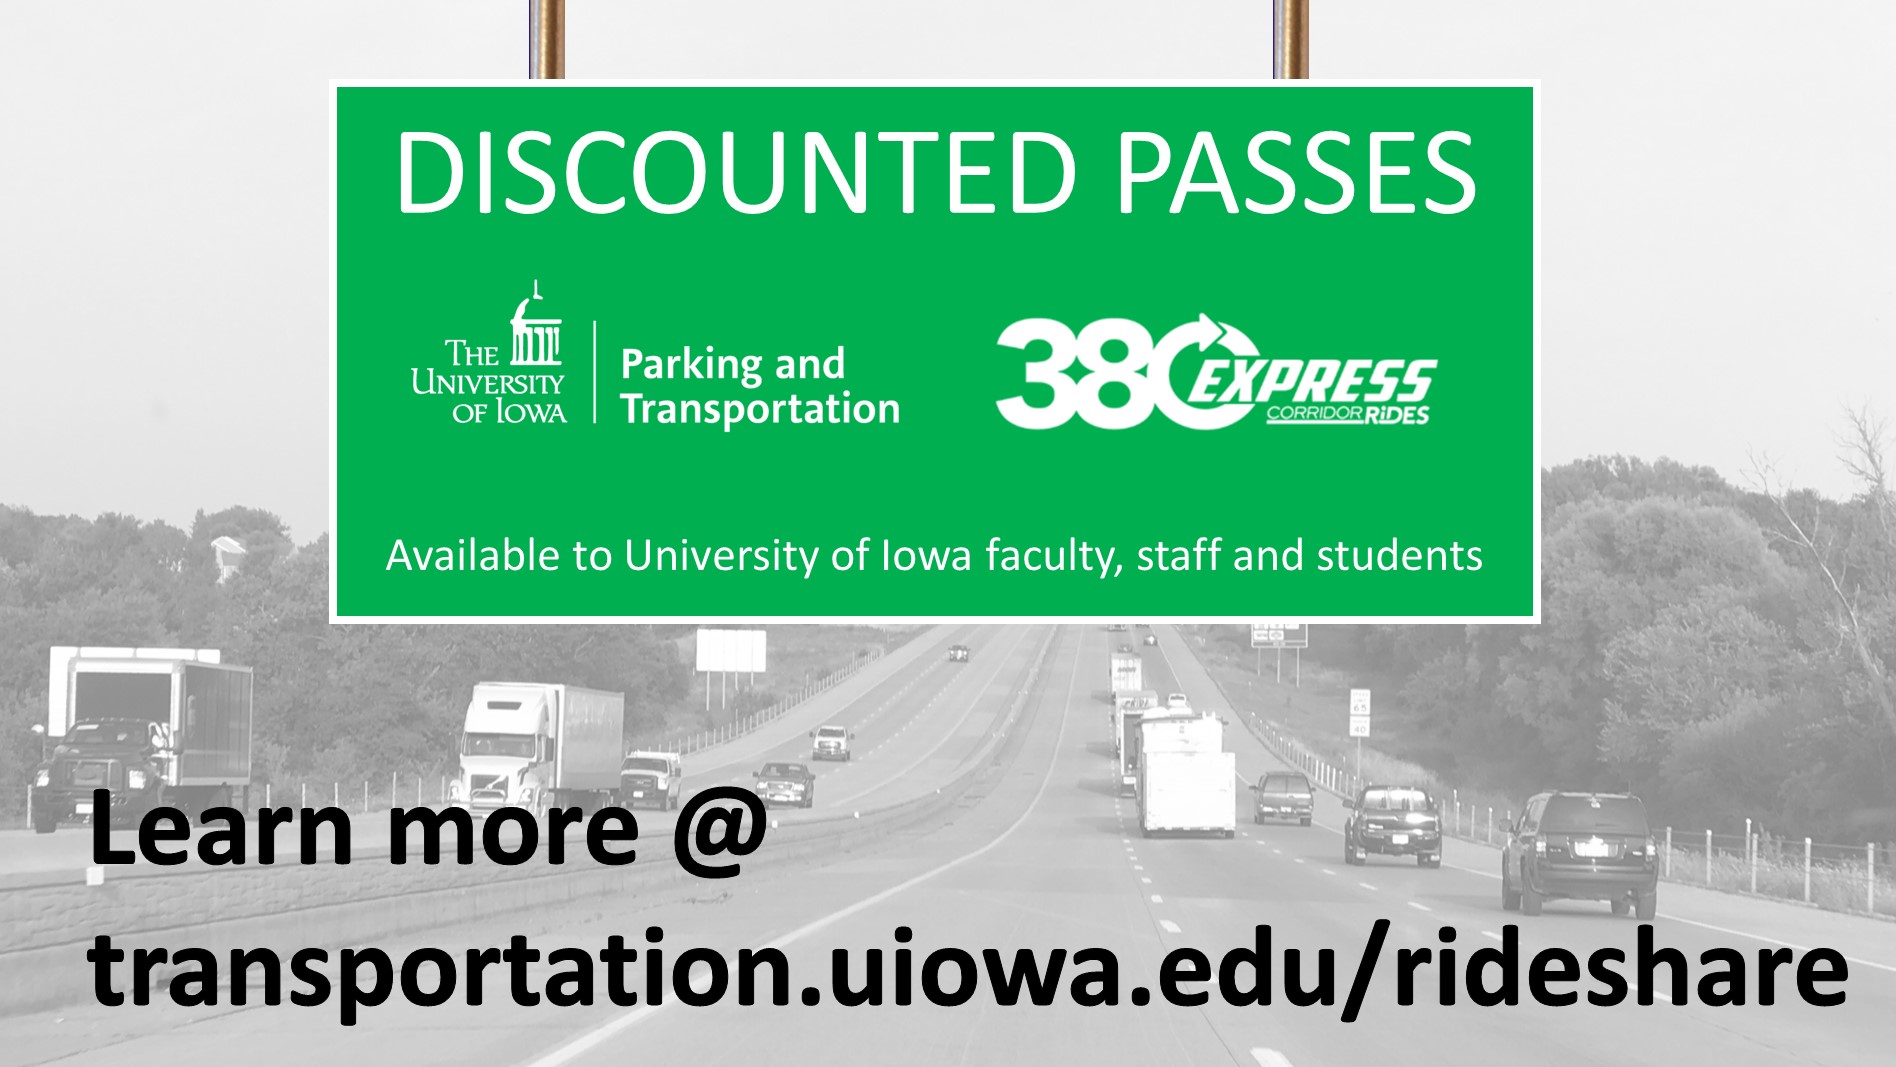 University discounted passes on 380 Express bus